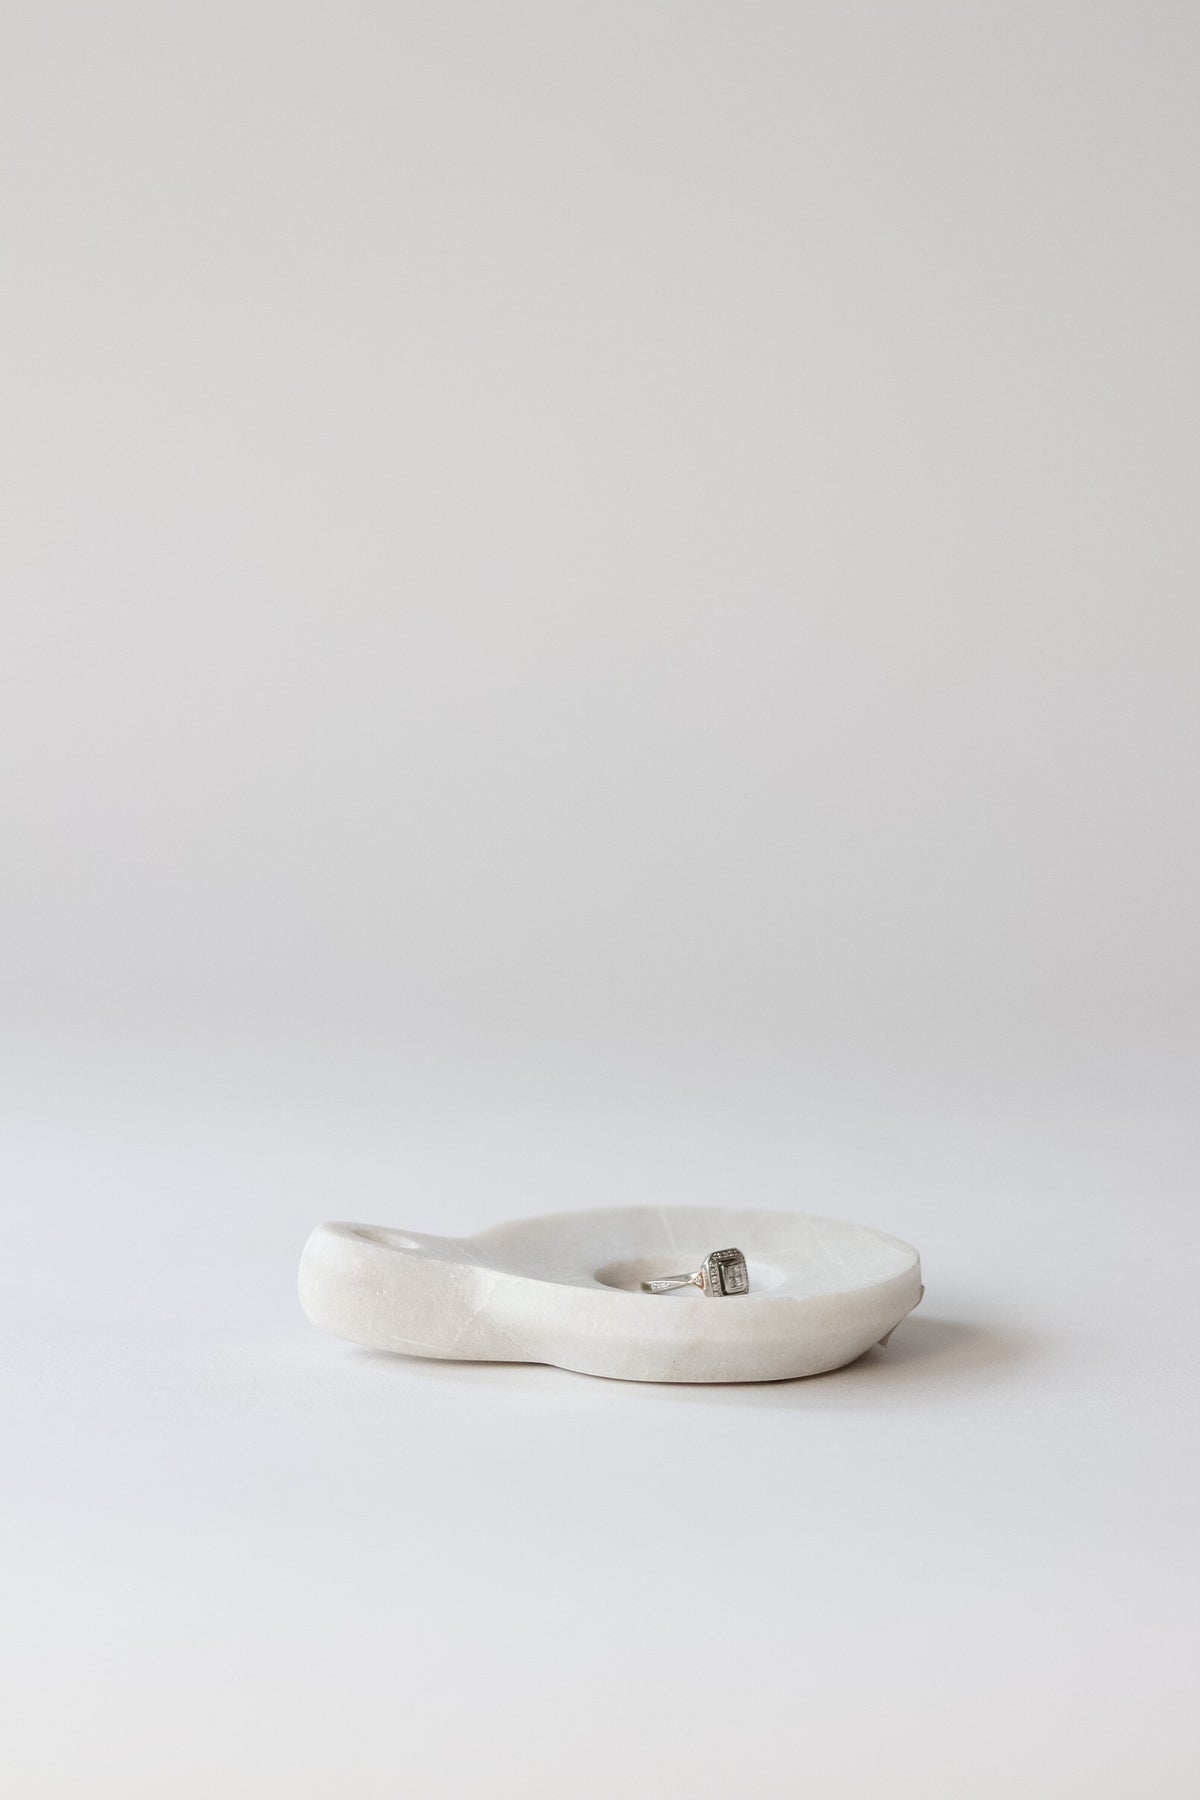 Marble Dish With Handle